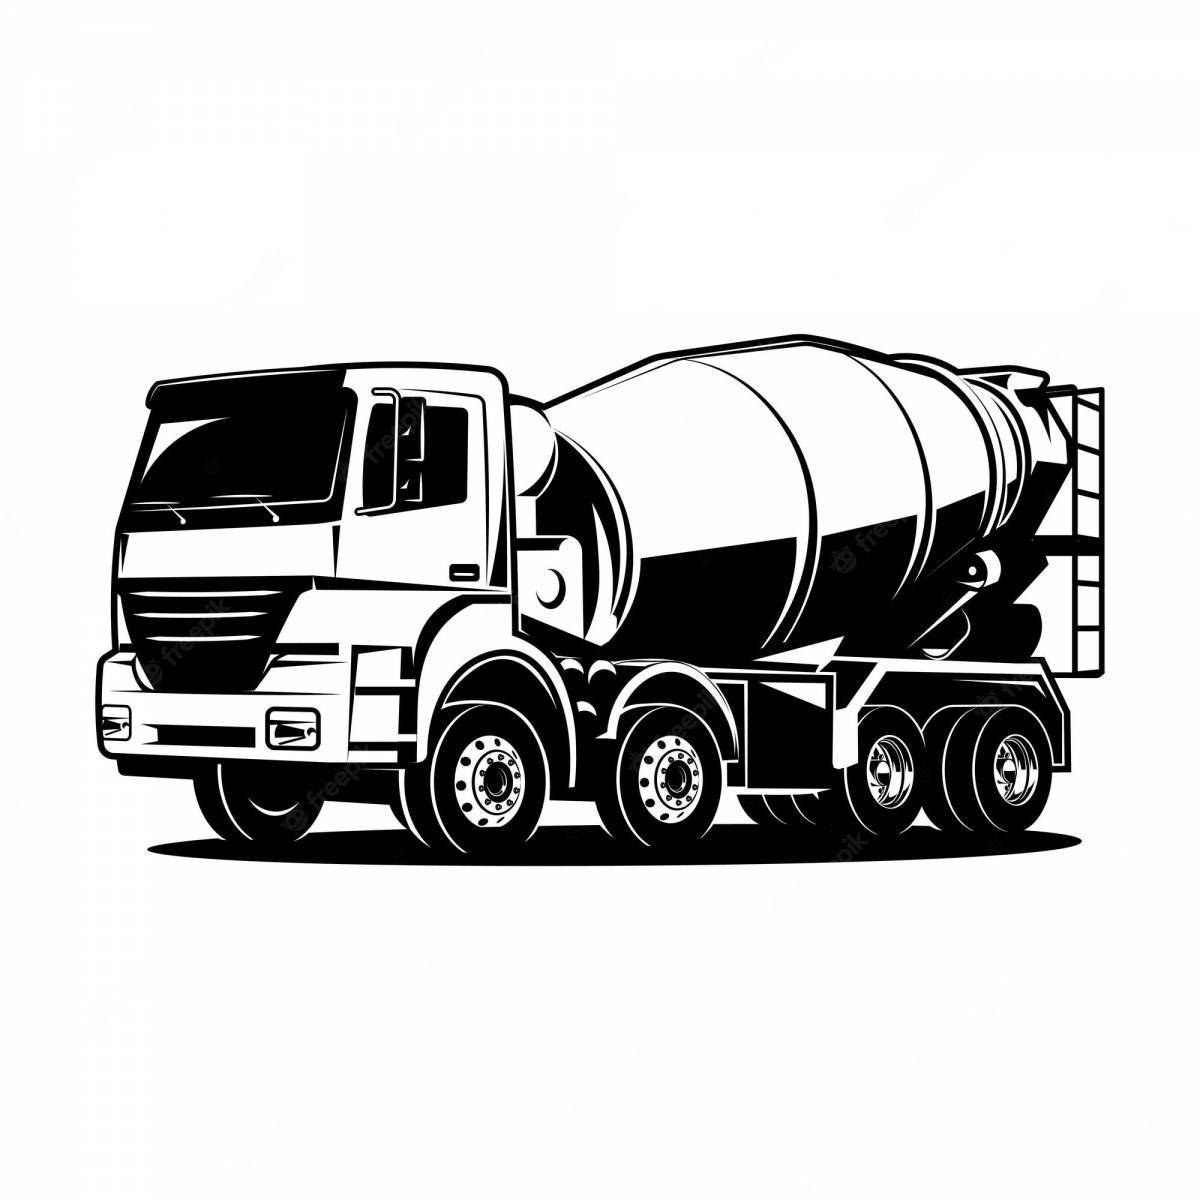 Exciting concrete mixer coloring page